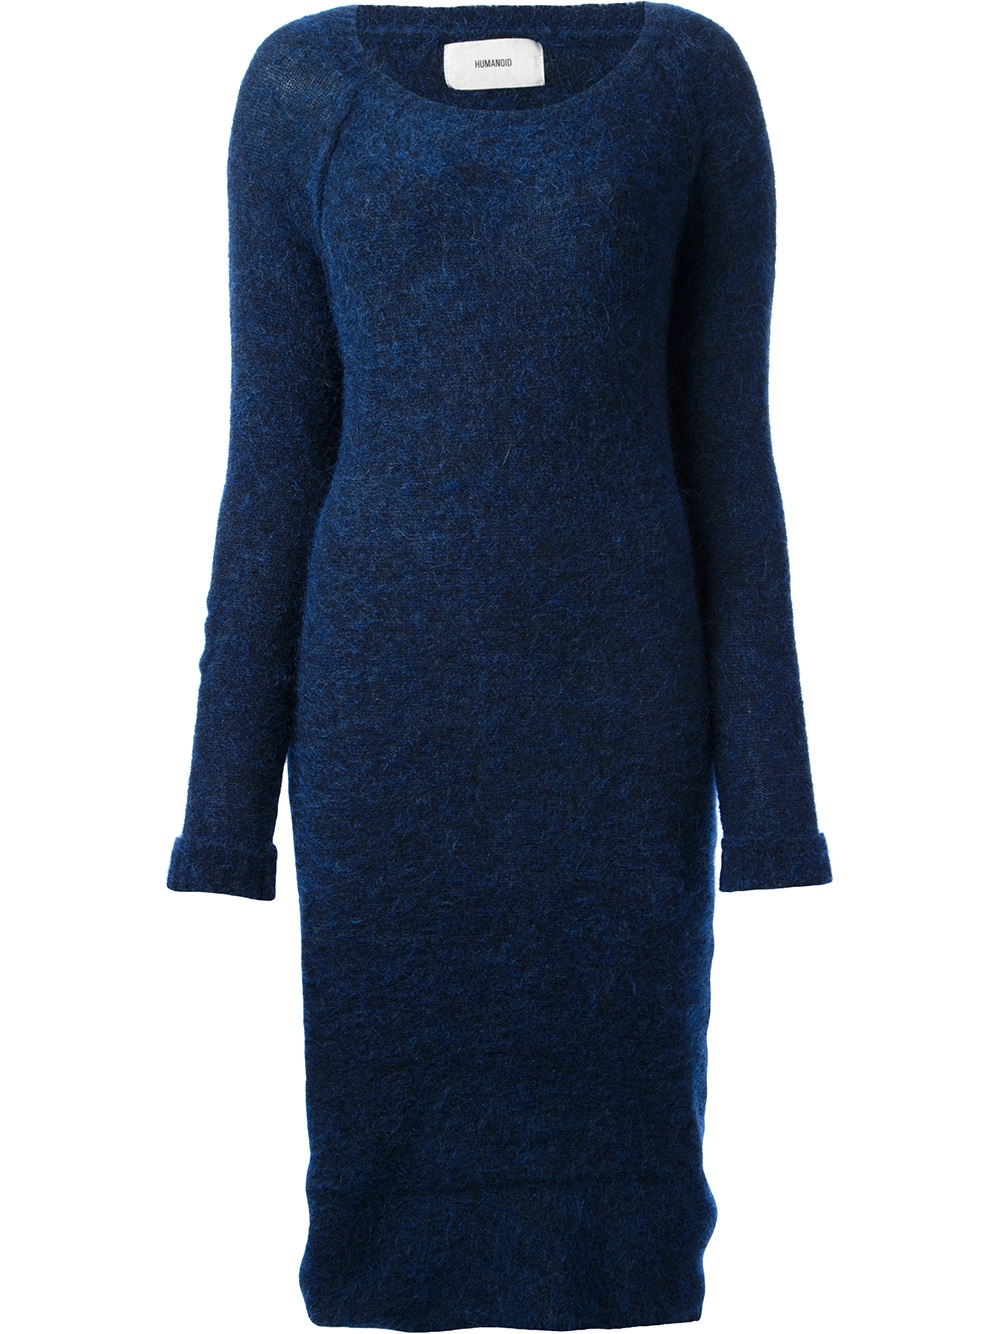 Lyst - Humanoid Claam Chunky Knit Dress in Blue